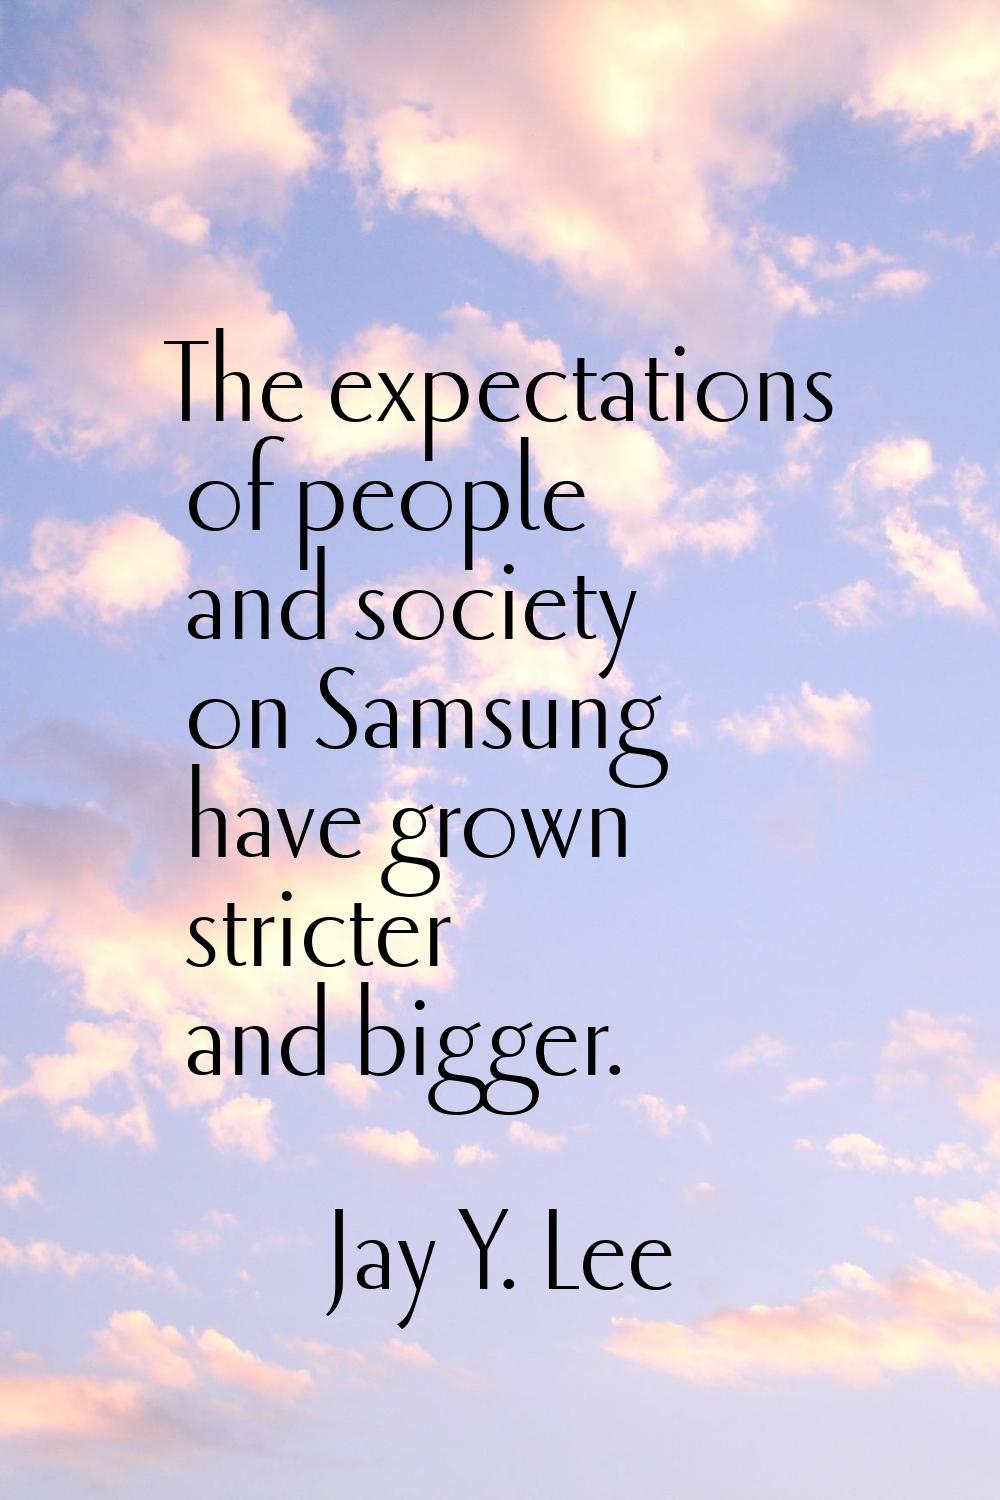 The expectations of people and society on Samsung have grown stricter and bigger.